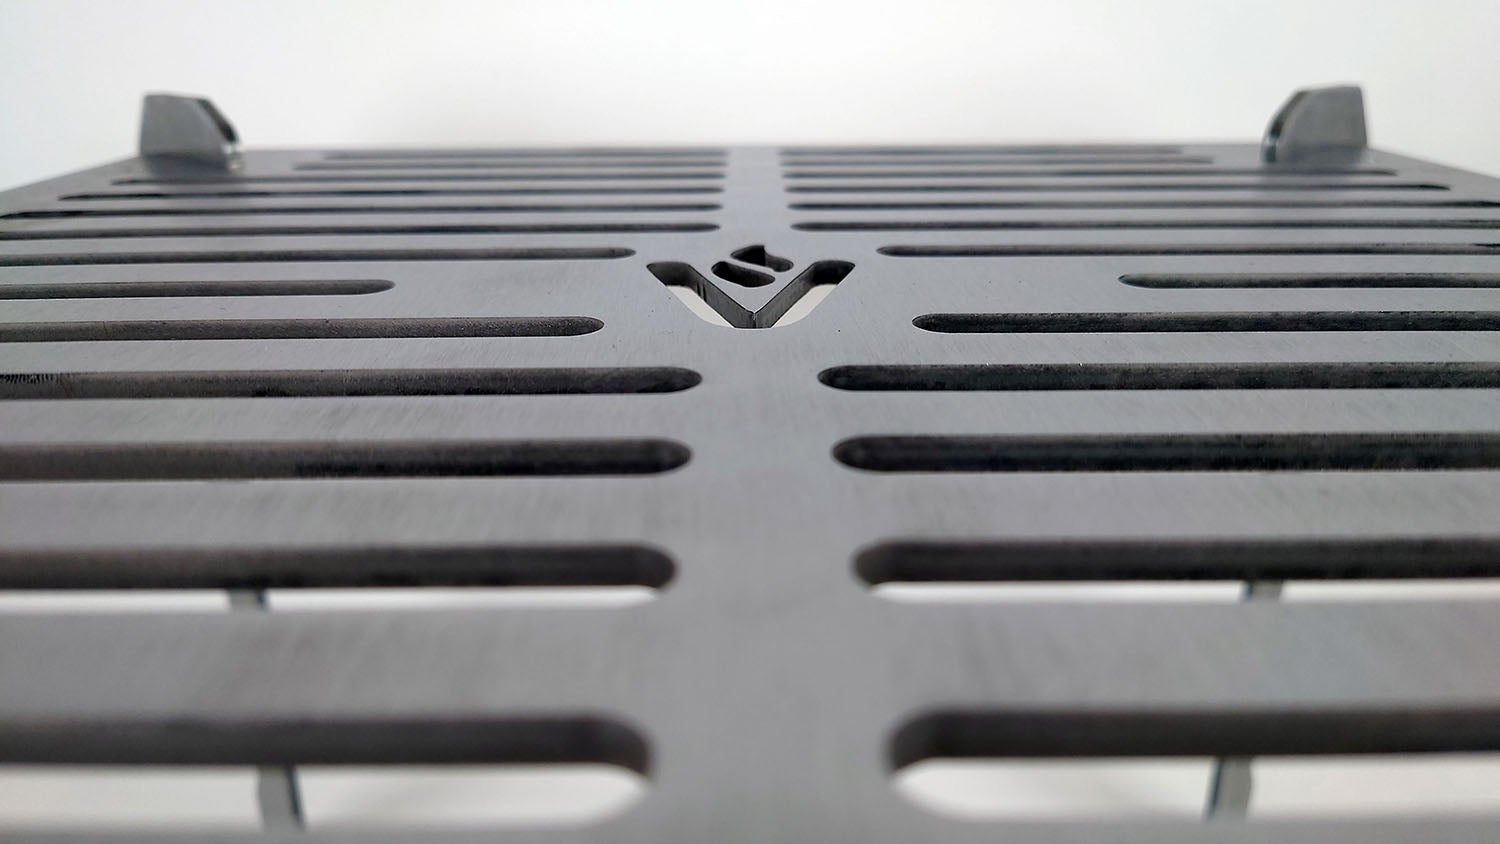 Closeup of the detailing on the cooktop showing the cutouts and the Volcann logomark